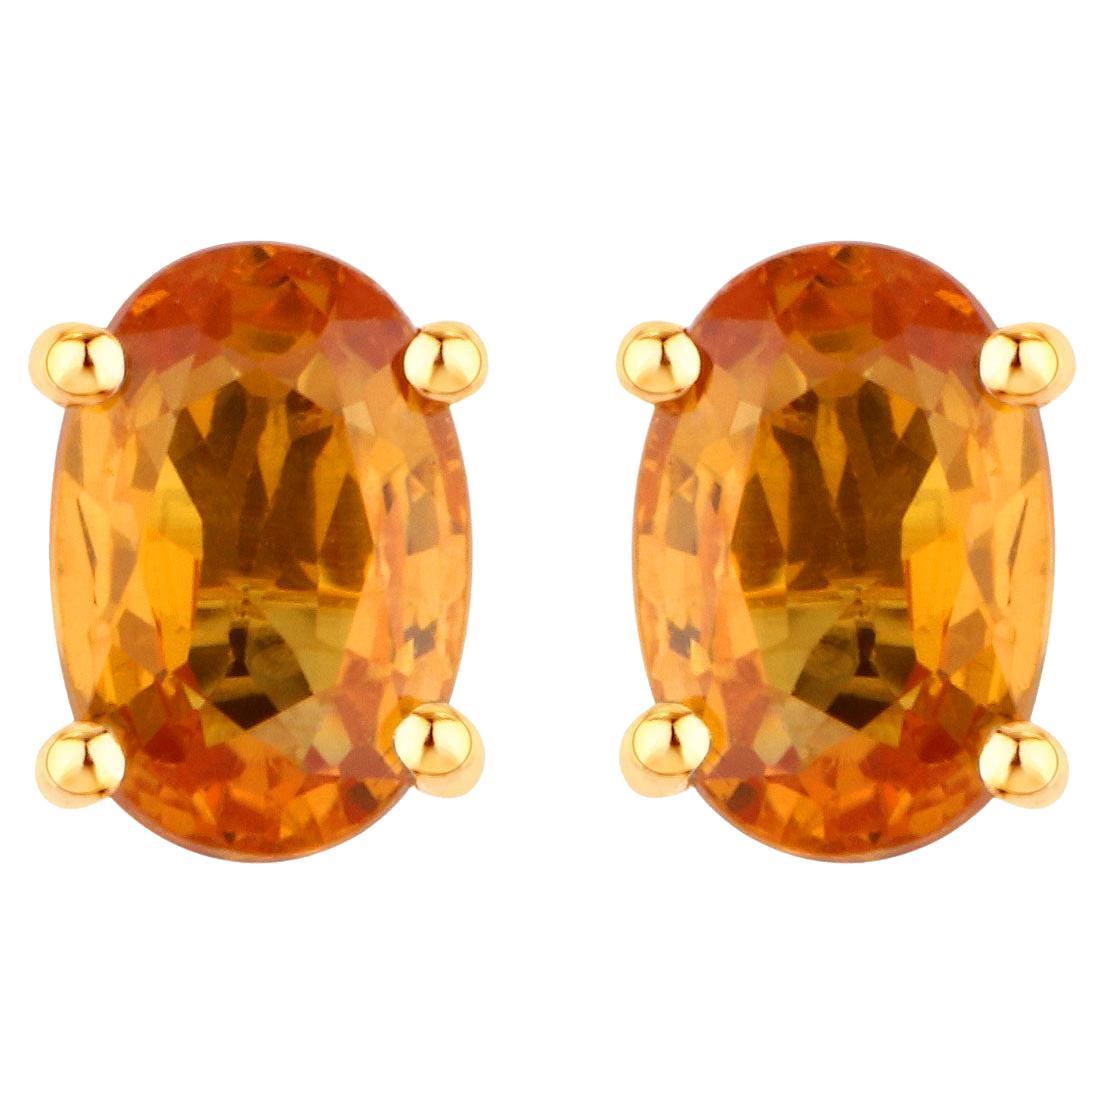 Orange Sapphire Stud Earrings 1.10 Carats Total 14K Yellow Gold For Sale